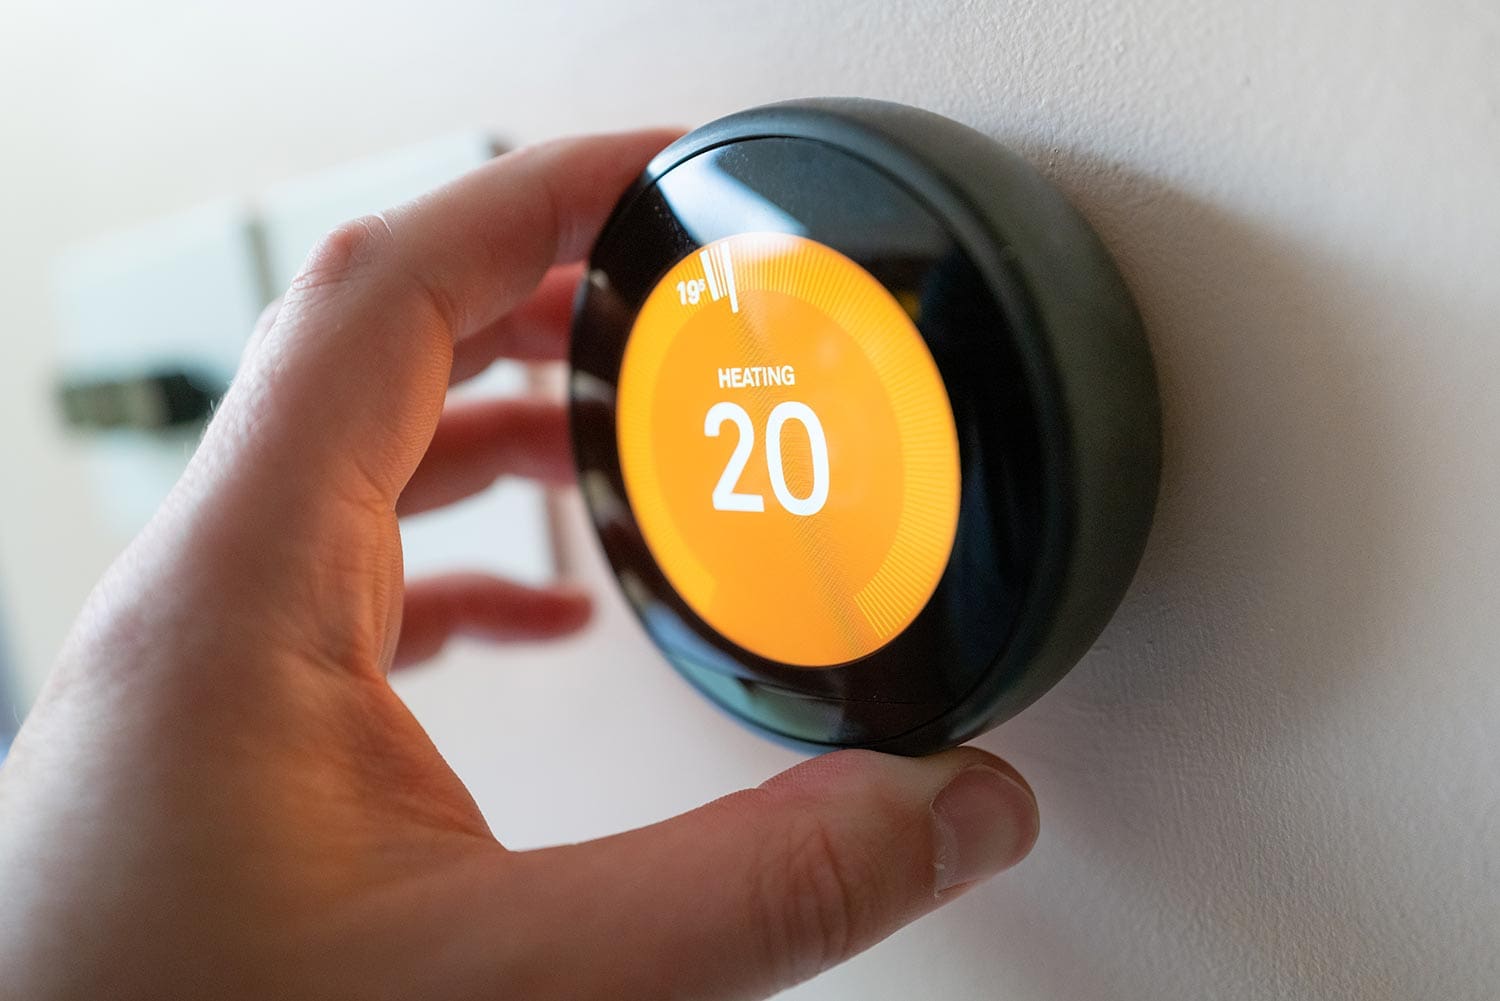 Regulating heating temperature with a modern smart thermostat